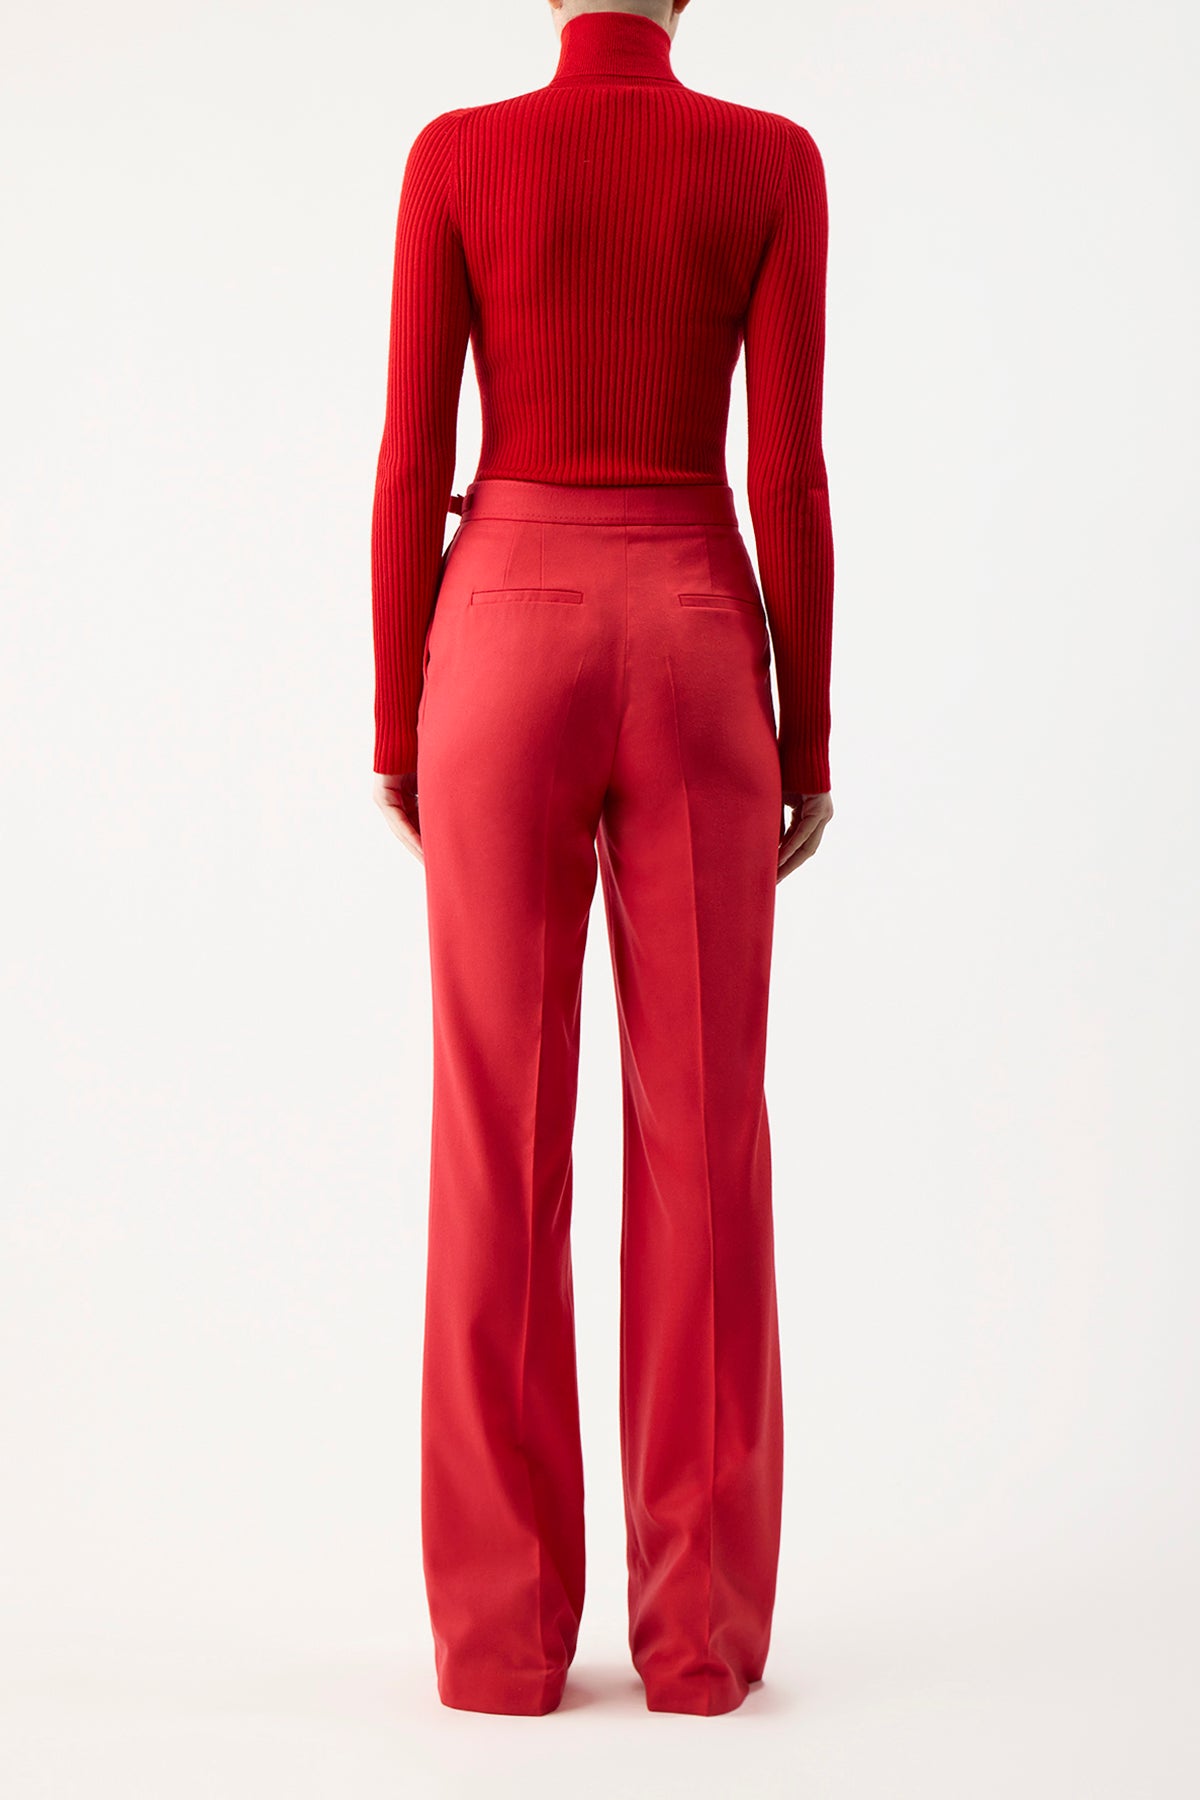 Peppe Knit Turtleneck in Red Cashmere Silk